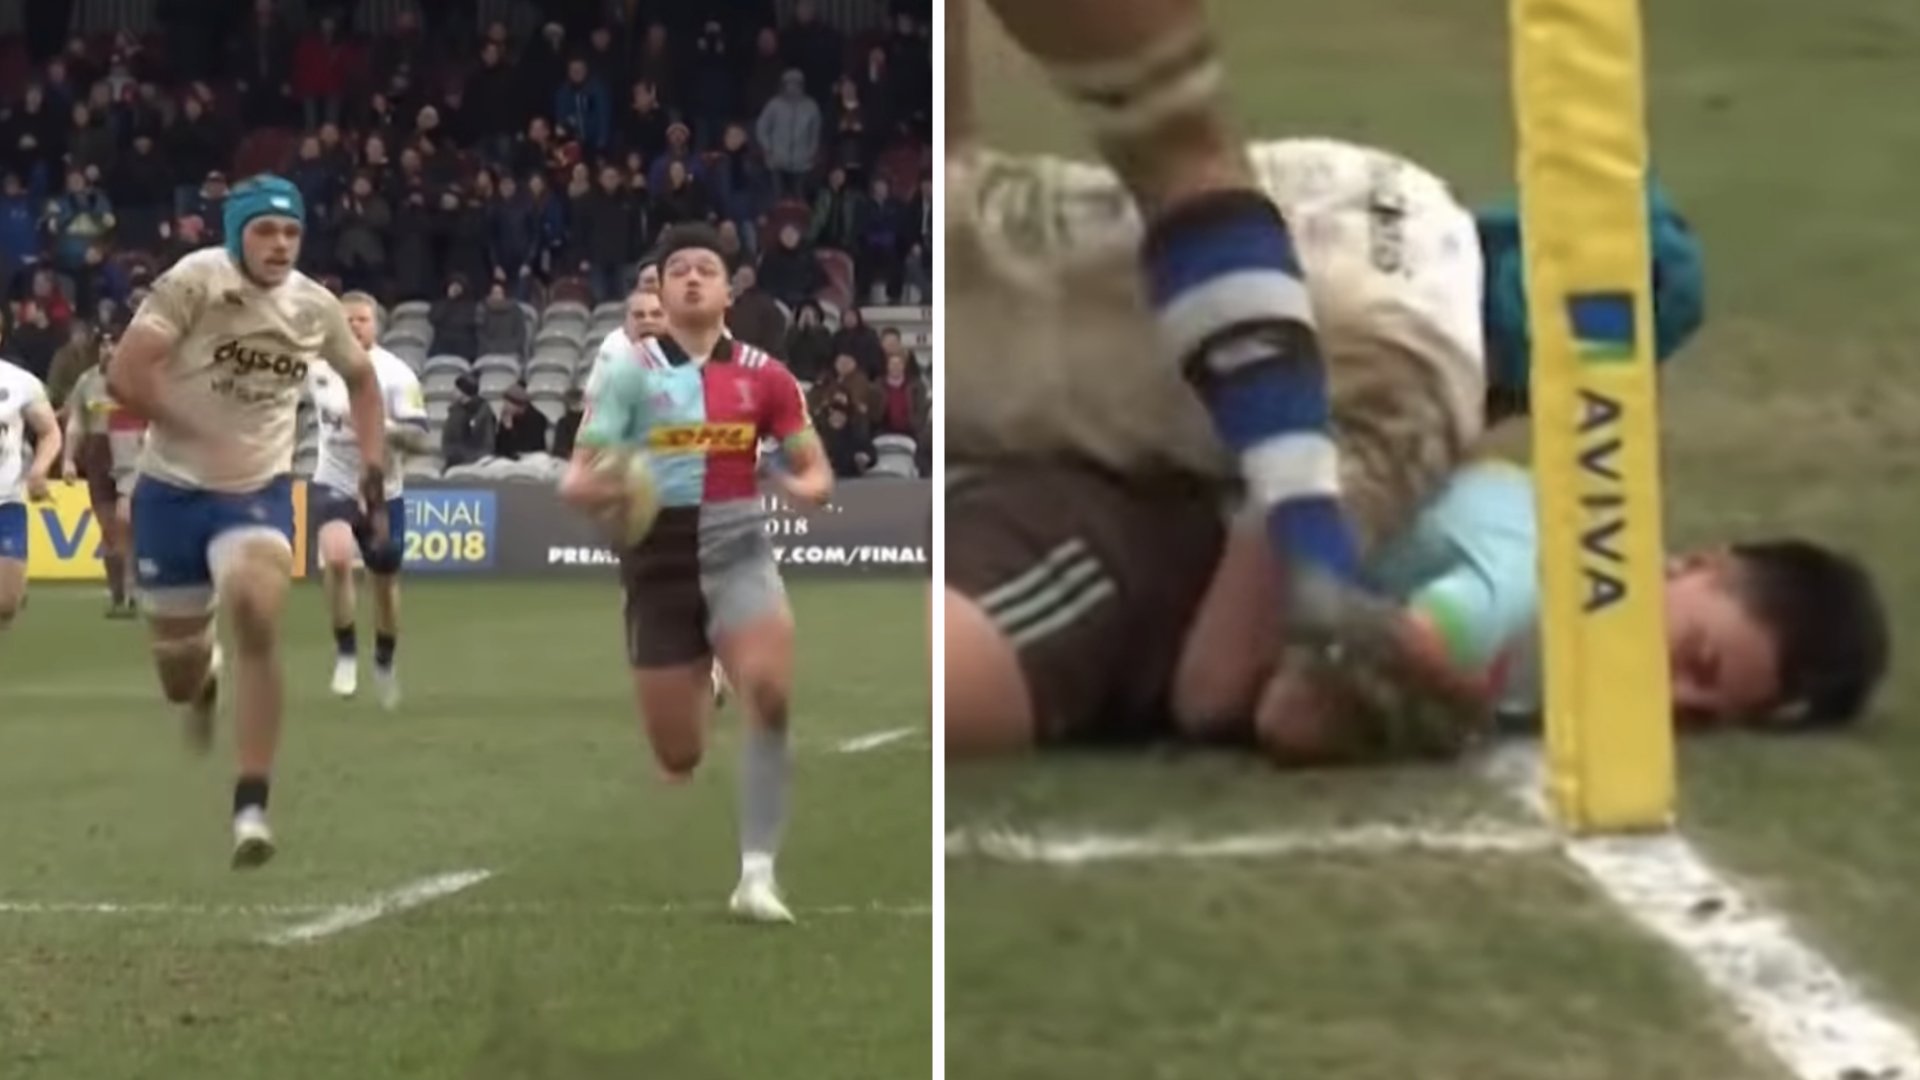 WATCH: The official Biggest Prem Hits compilation has just dropped and it's borderline abuse